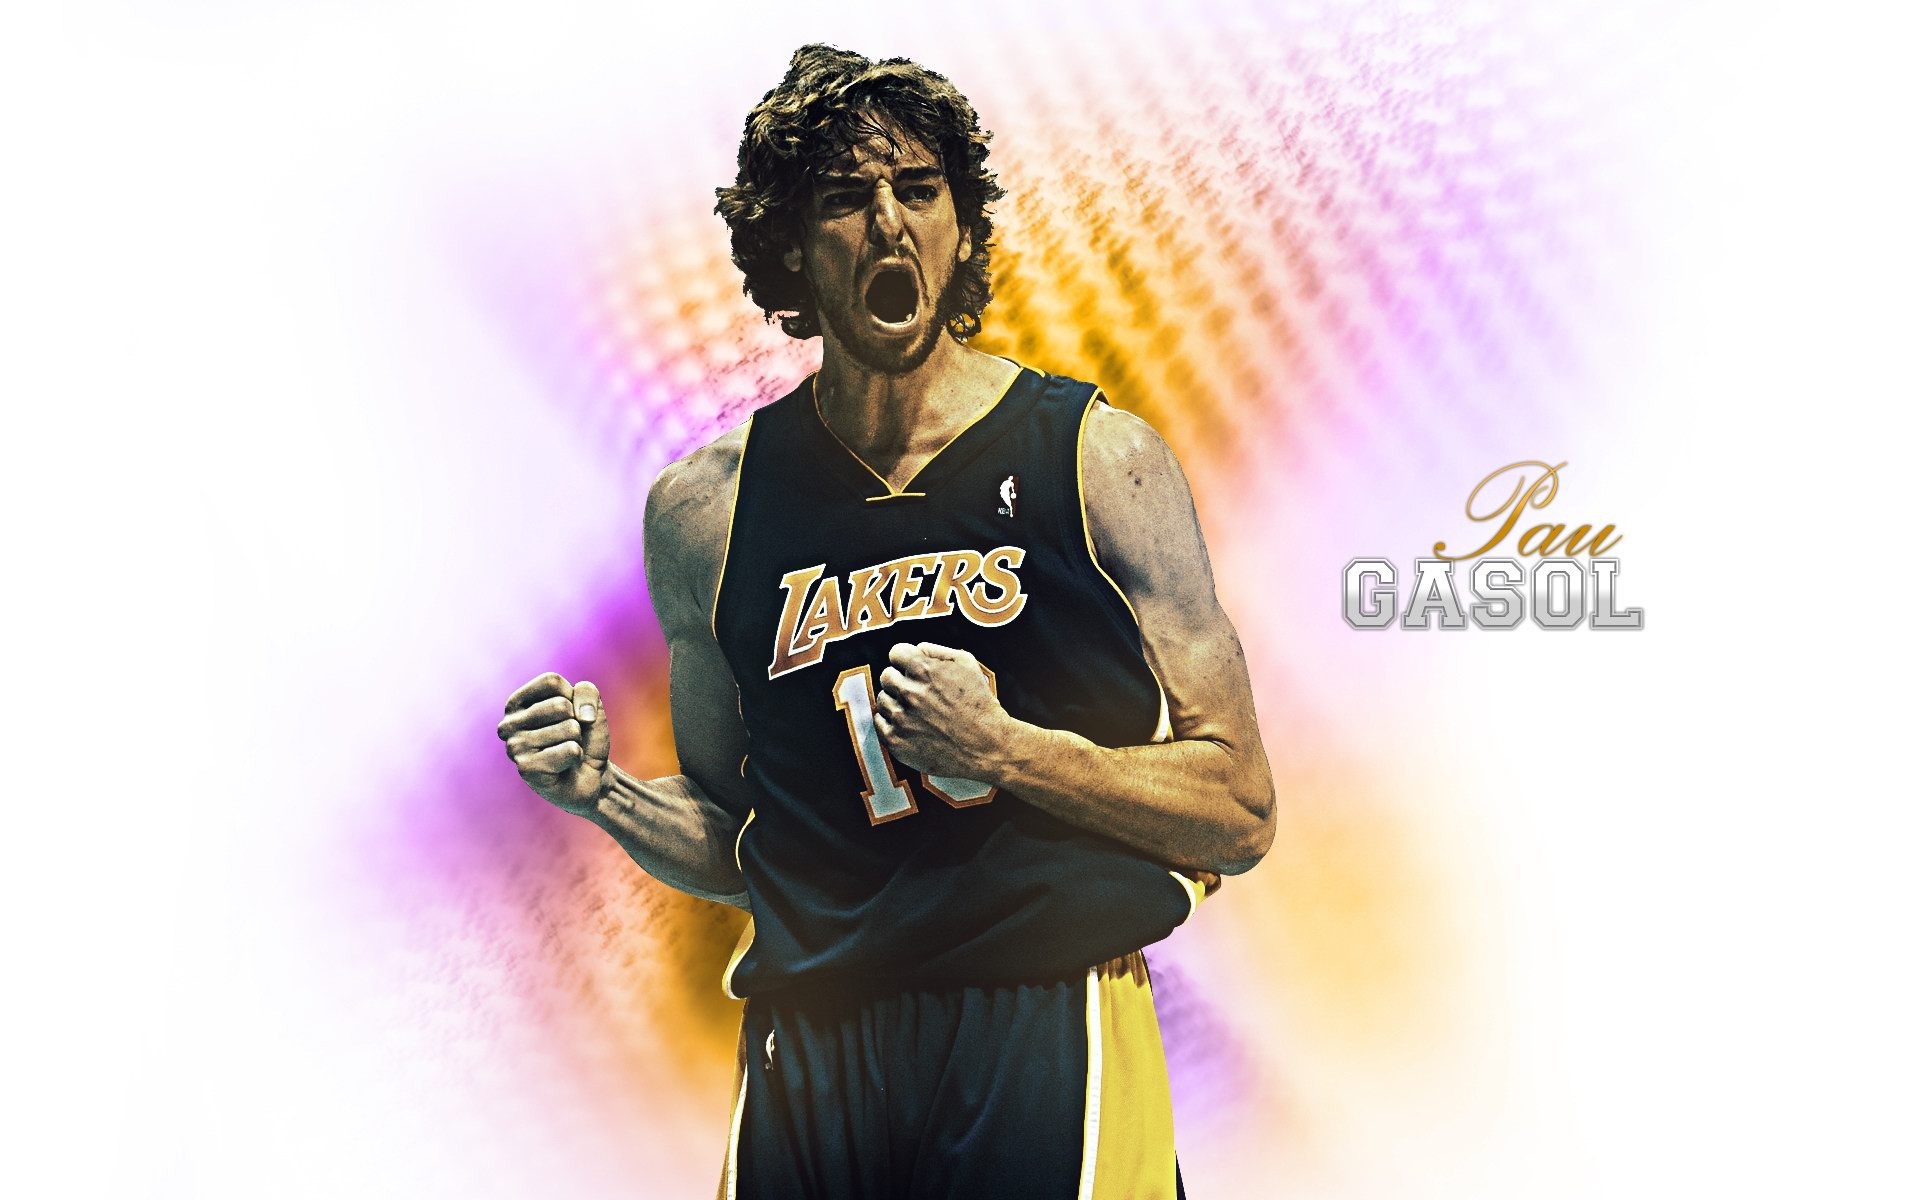 Los Angeles Lakers Wallpaper Oficial #21 - 1920x1200